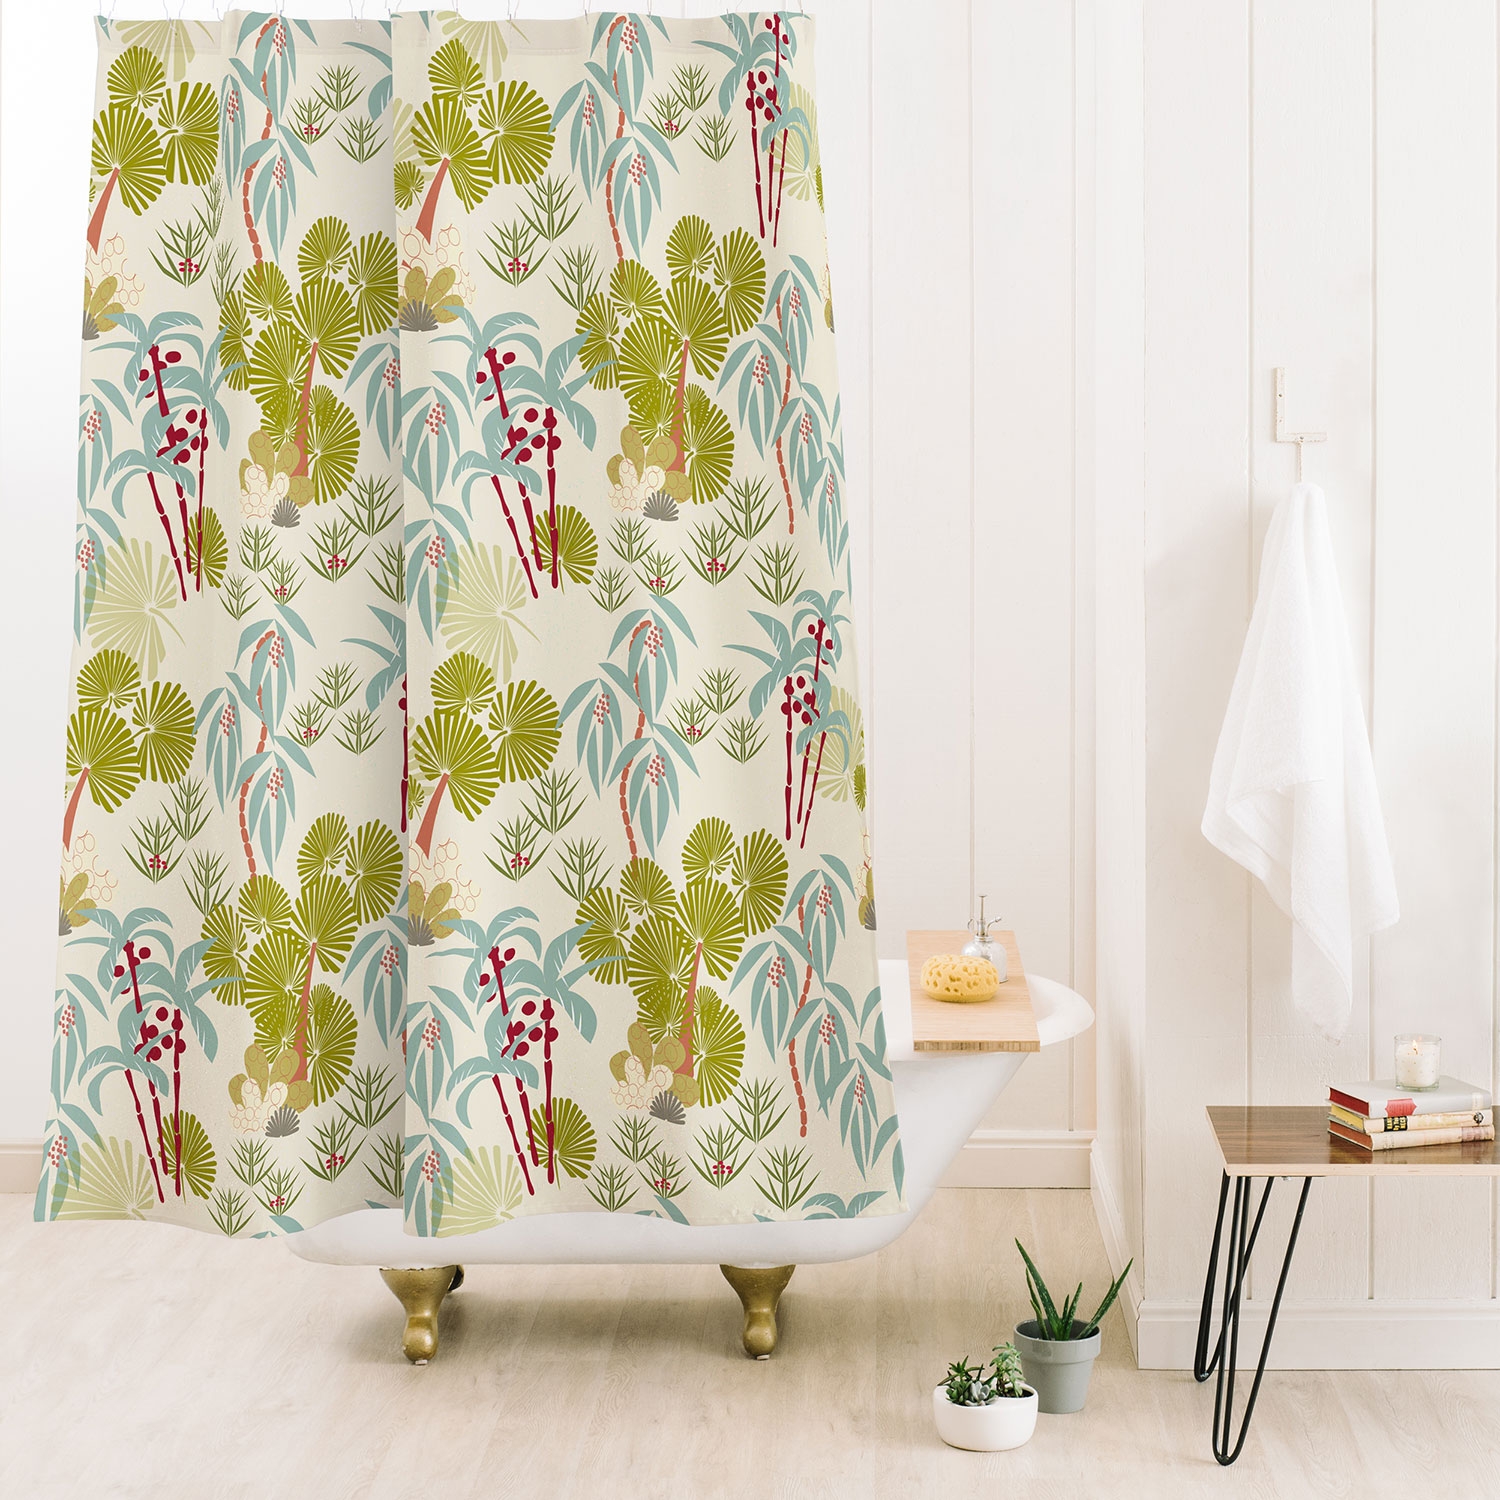 Tropical Spring by Mirimo - Shower Curtain Standard 71" x 74" - Image 1